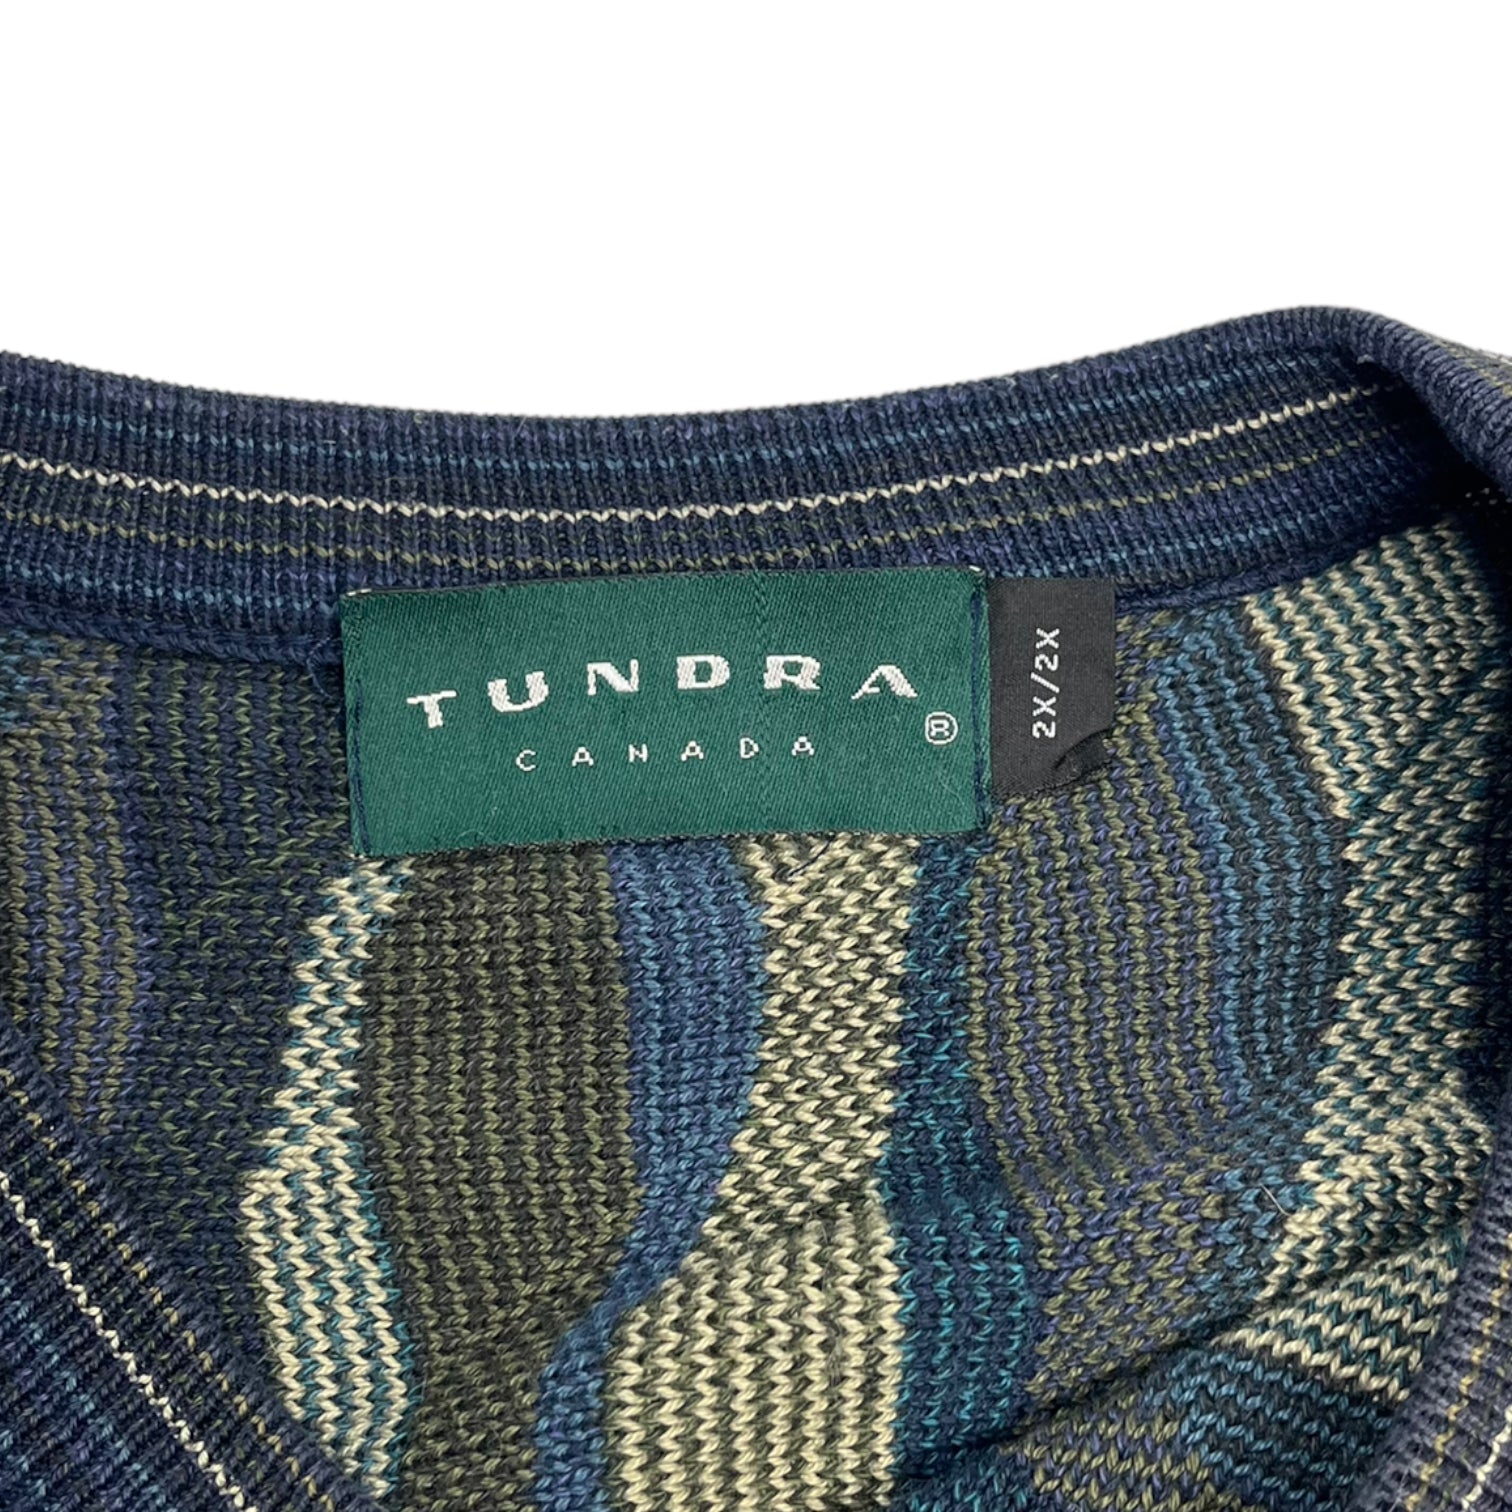 Vintage Tundra Squiggly Vertical Patterned Knit